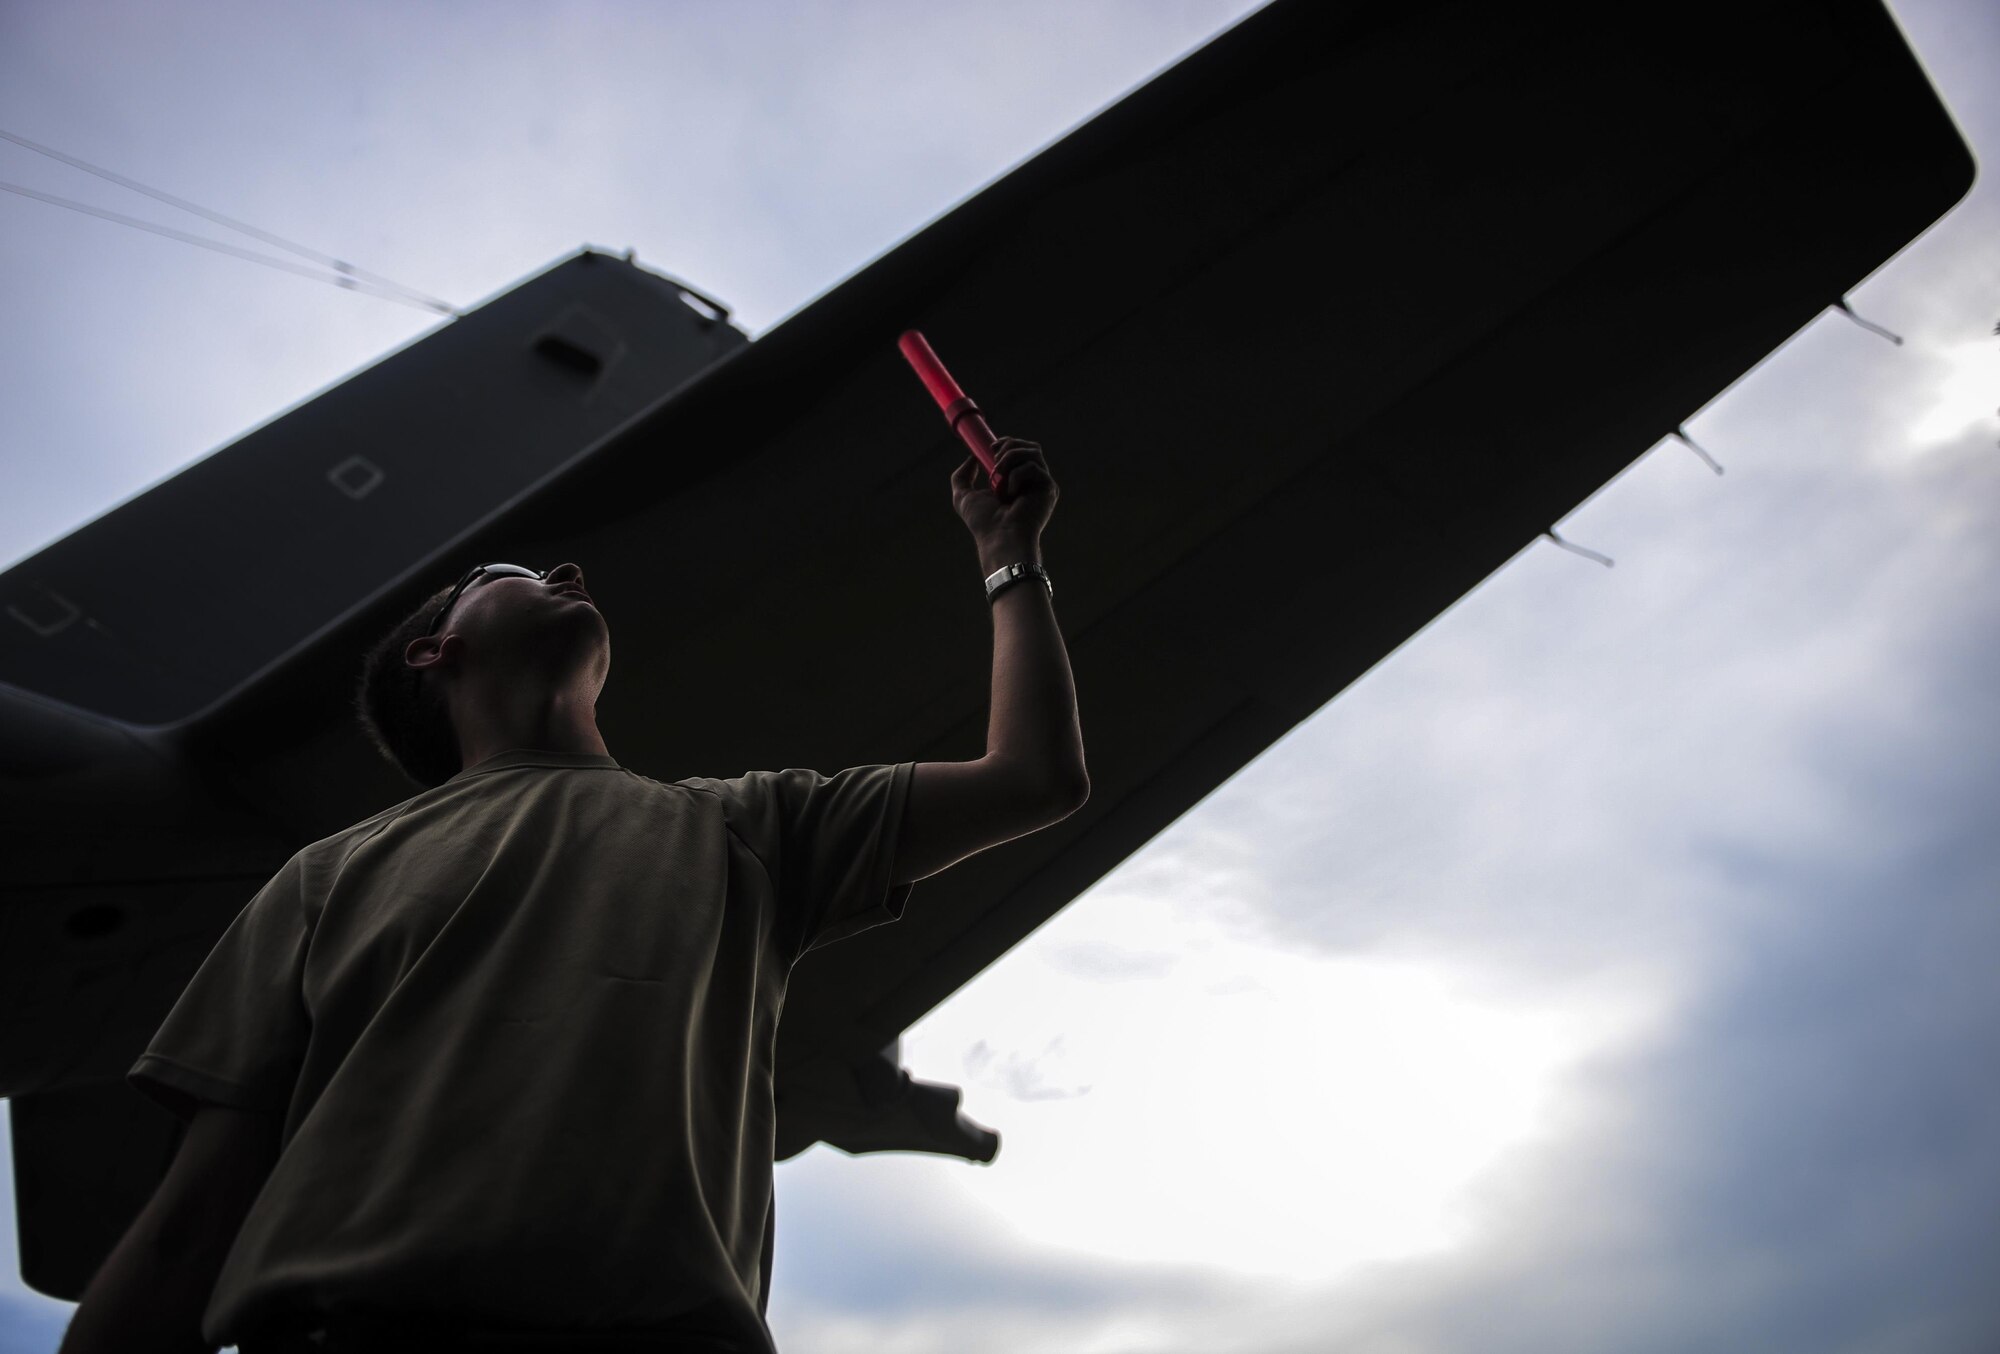 A maintainer with the 1st Special Operations Aircraft Maintenance Squadron watches the tail of an AC-130H Spectre as it’s towed down Independence Road on Hurlburt Field, Fla., Aug. 15, 2015. More than 40 personnel with eight base organizations were on site during the tow process. The AC-130H Spectre will be displayed at the North end of the Air Park. (U.S. Air Force photo by Senior Airman Meagan Schutter/Released)